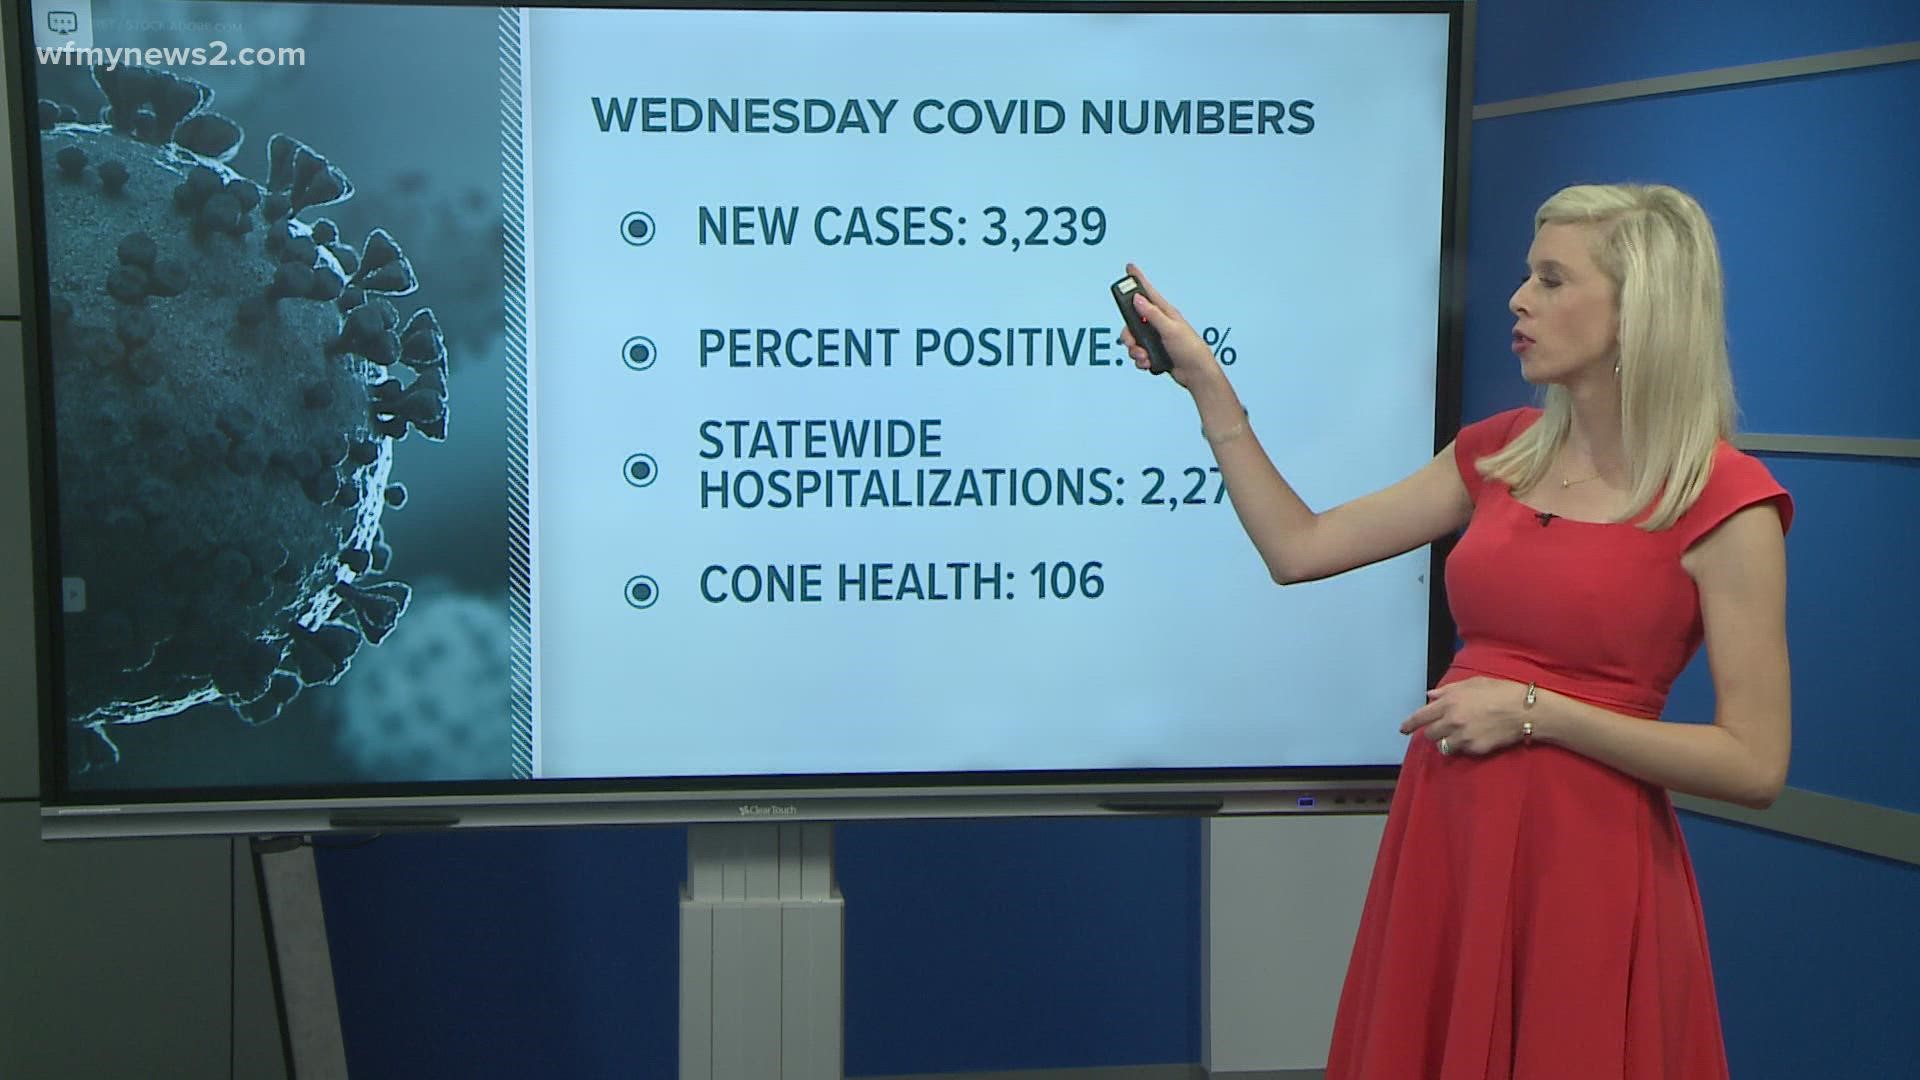 It appears COVID vaccines and precautions have worked to slow the late-summer surge of COVID-19.